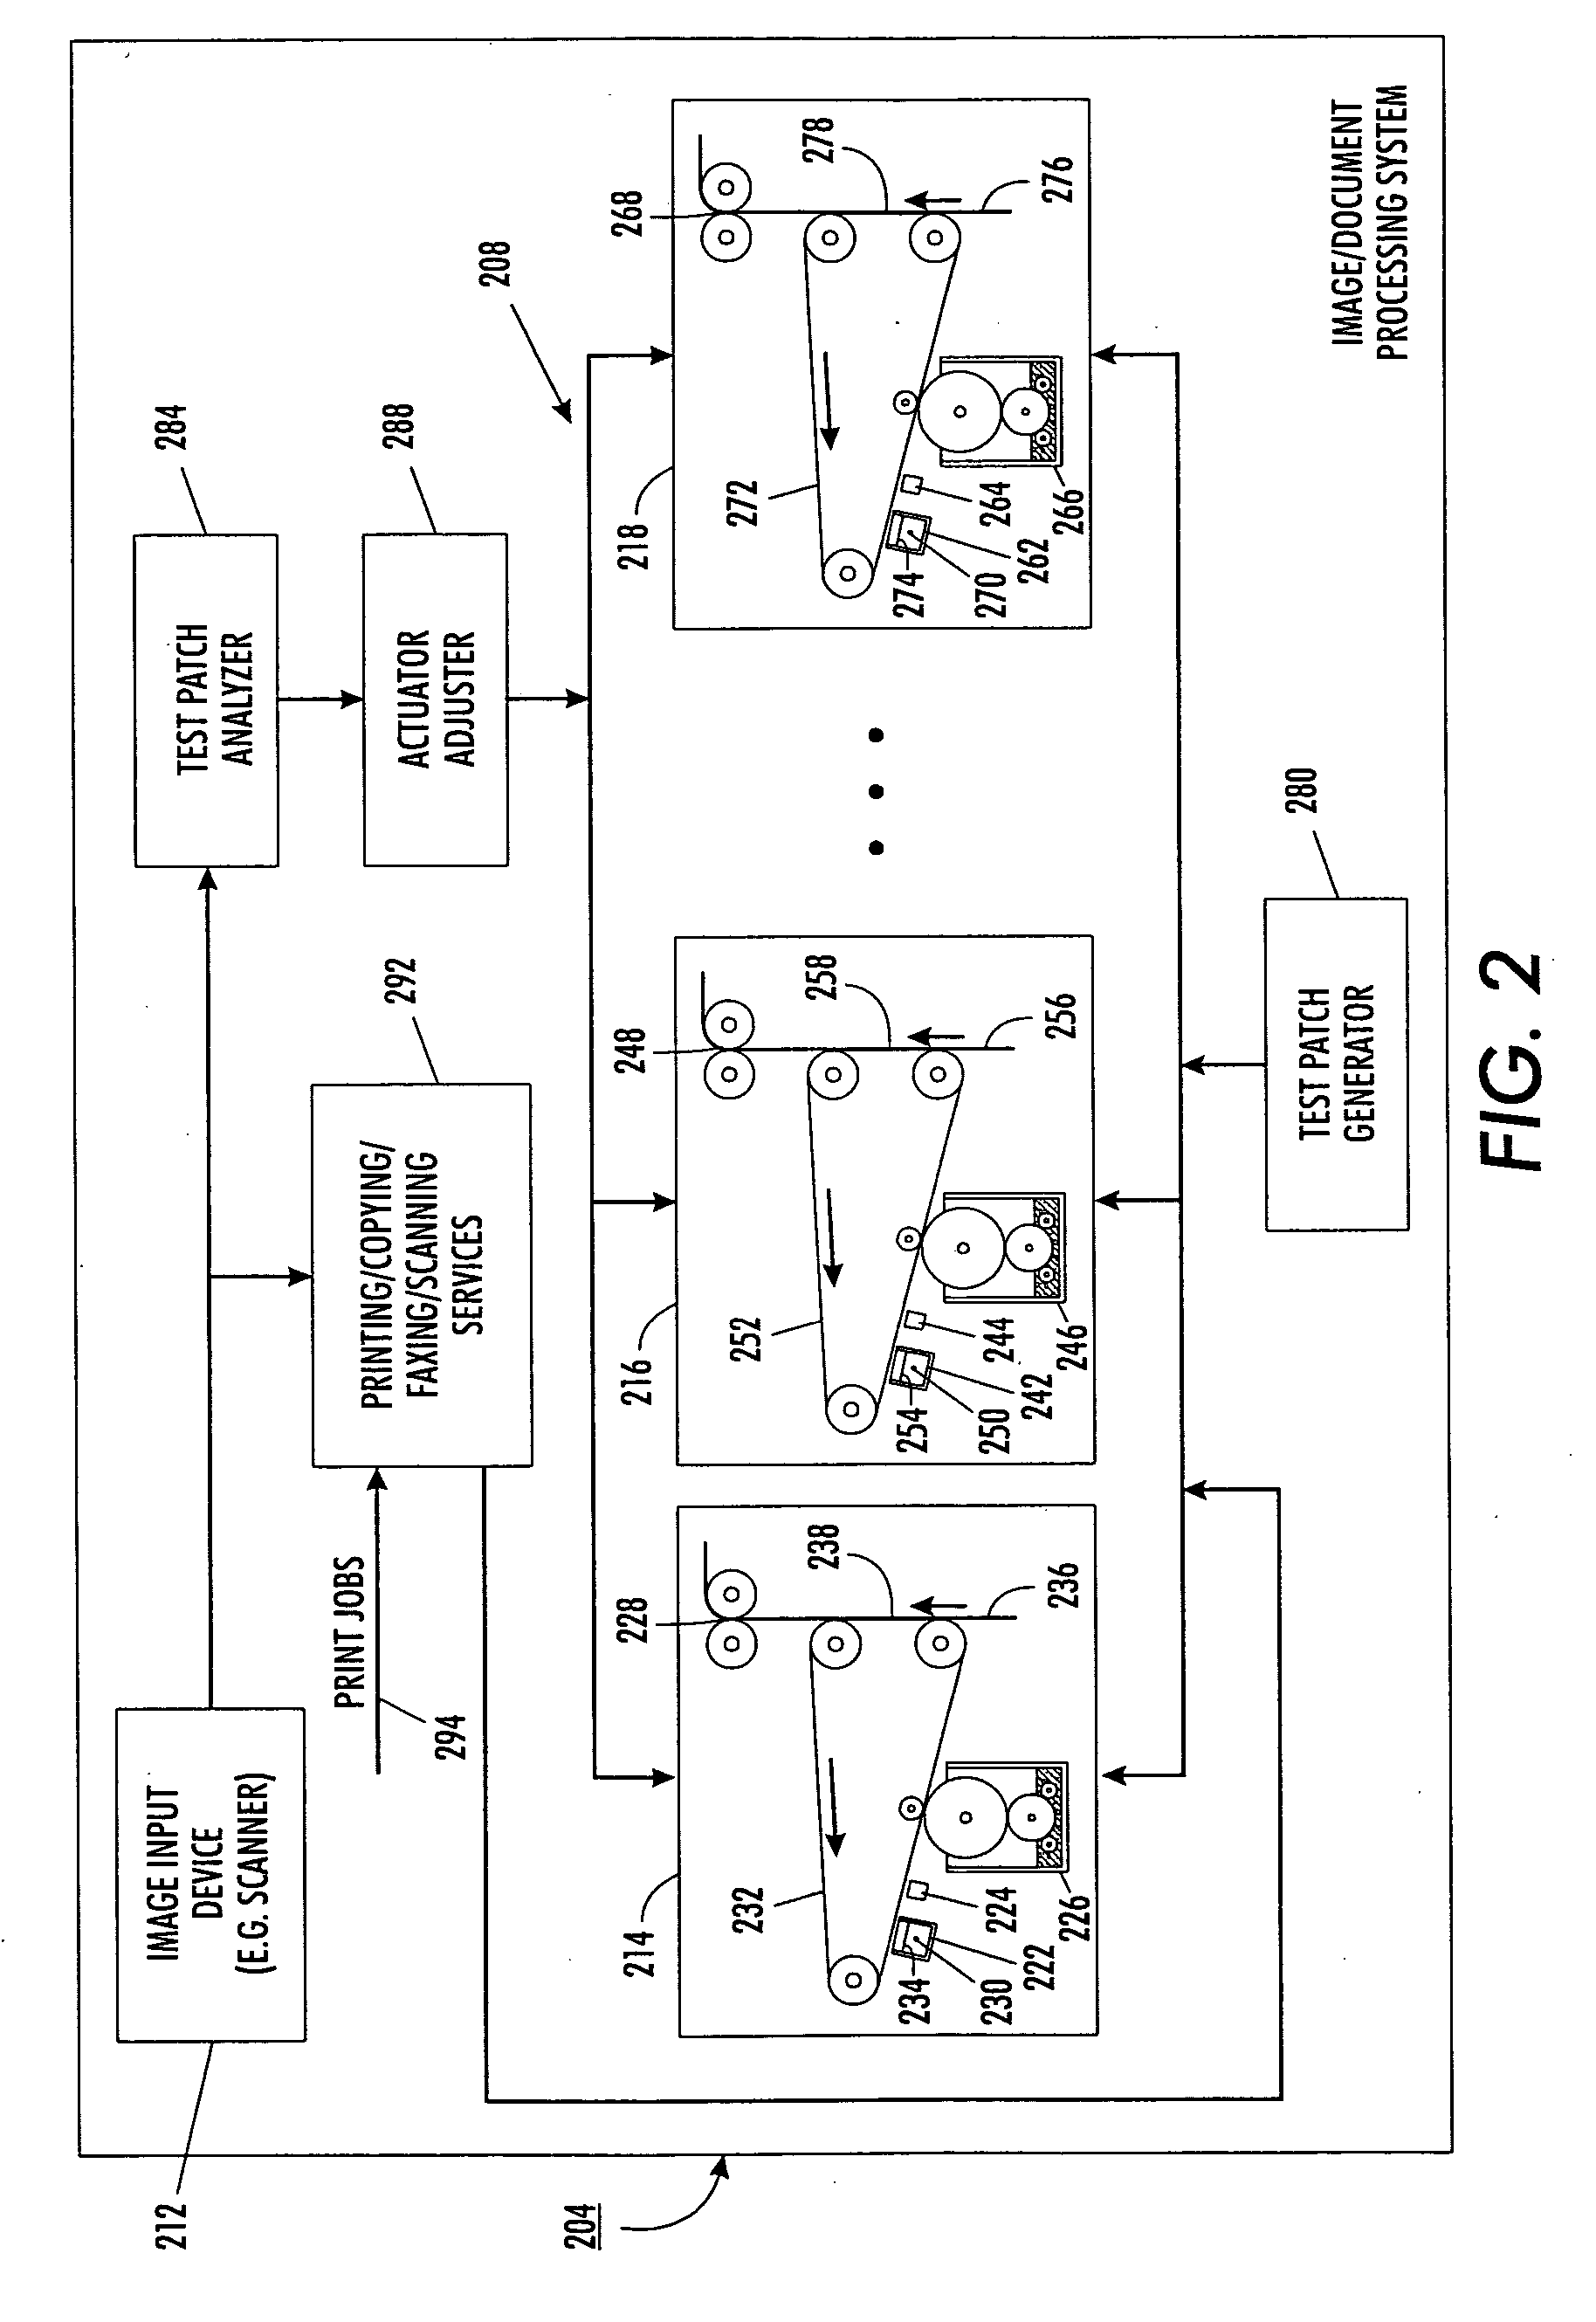 Semi-automatic image quality adjustment for multiple marking engine systems